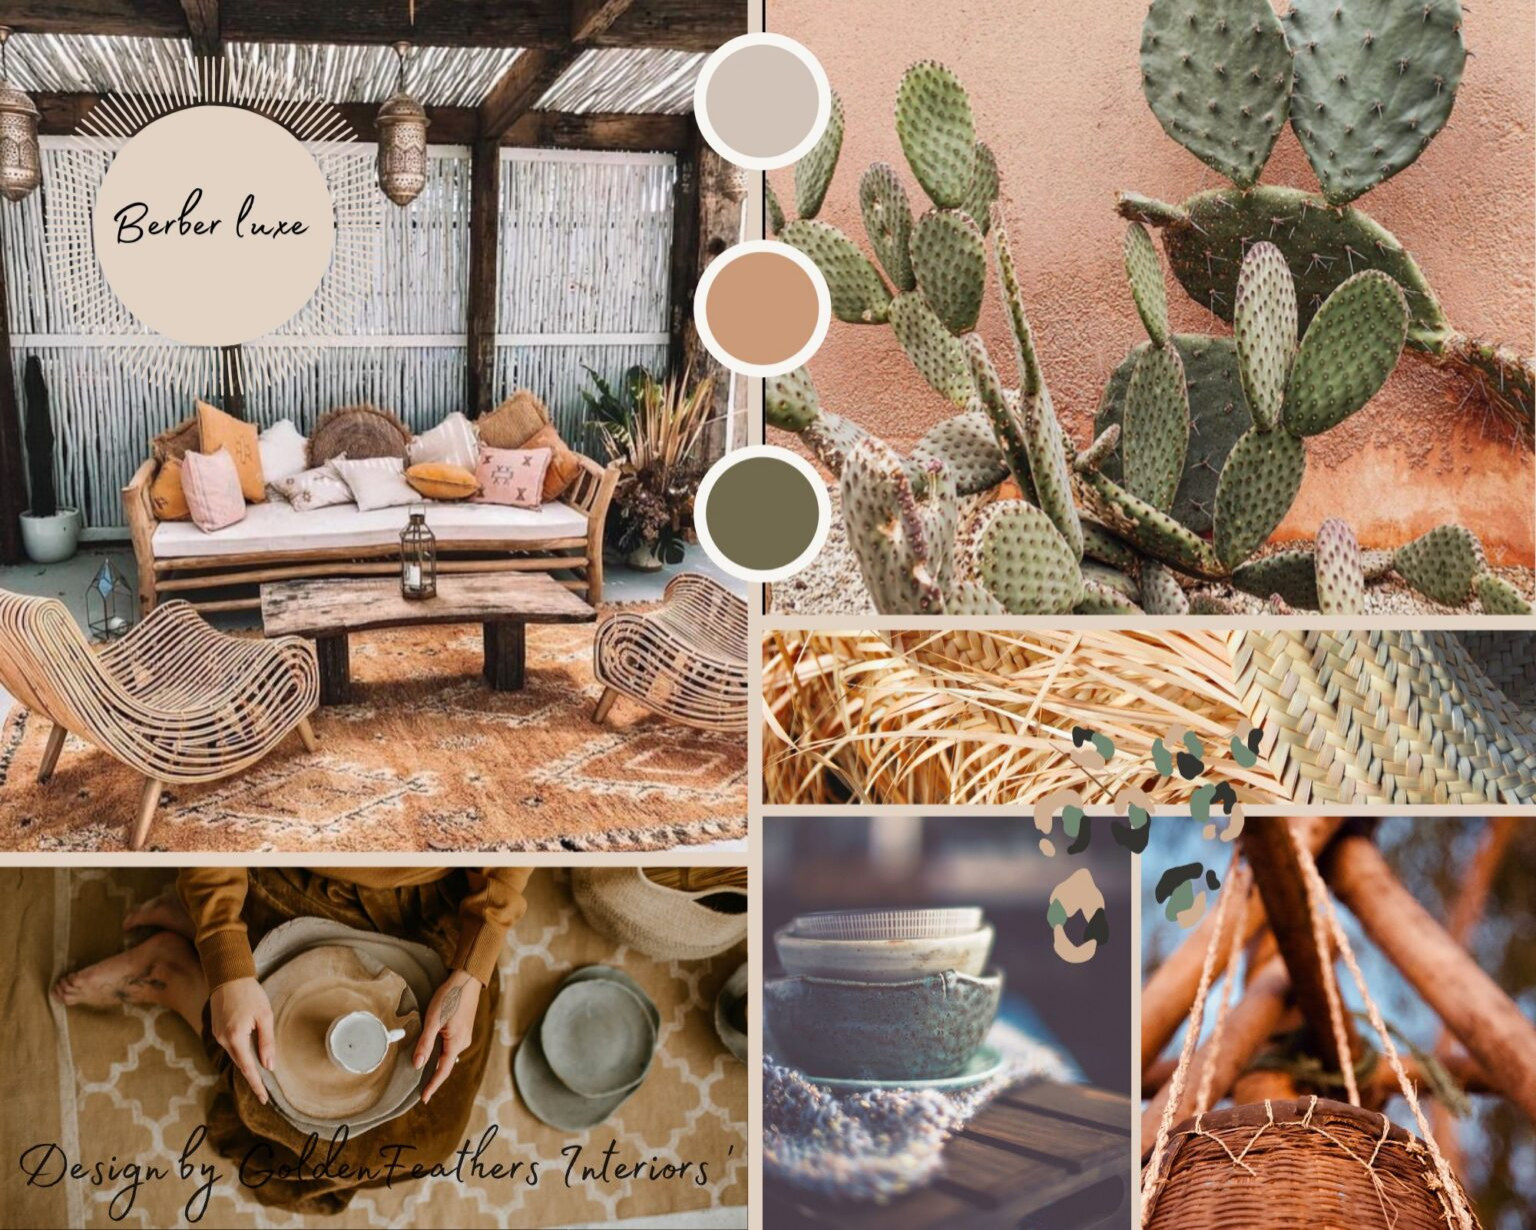 Berber Luxe:   This is a palette we will se a lot of this year. Its earthy, grounding and secure, and suitable for all seasons. This scheme has an informal, calming feel. Its understated and welcoming